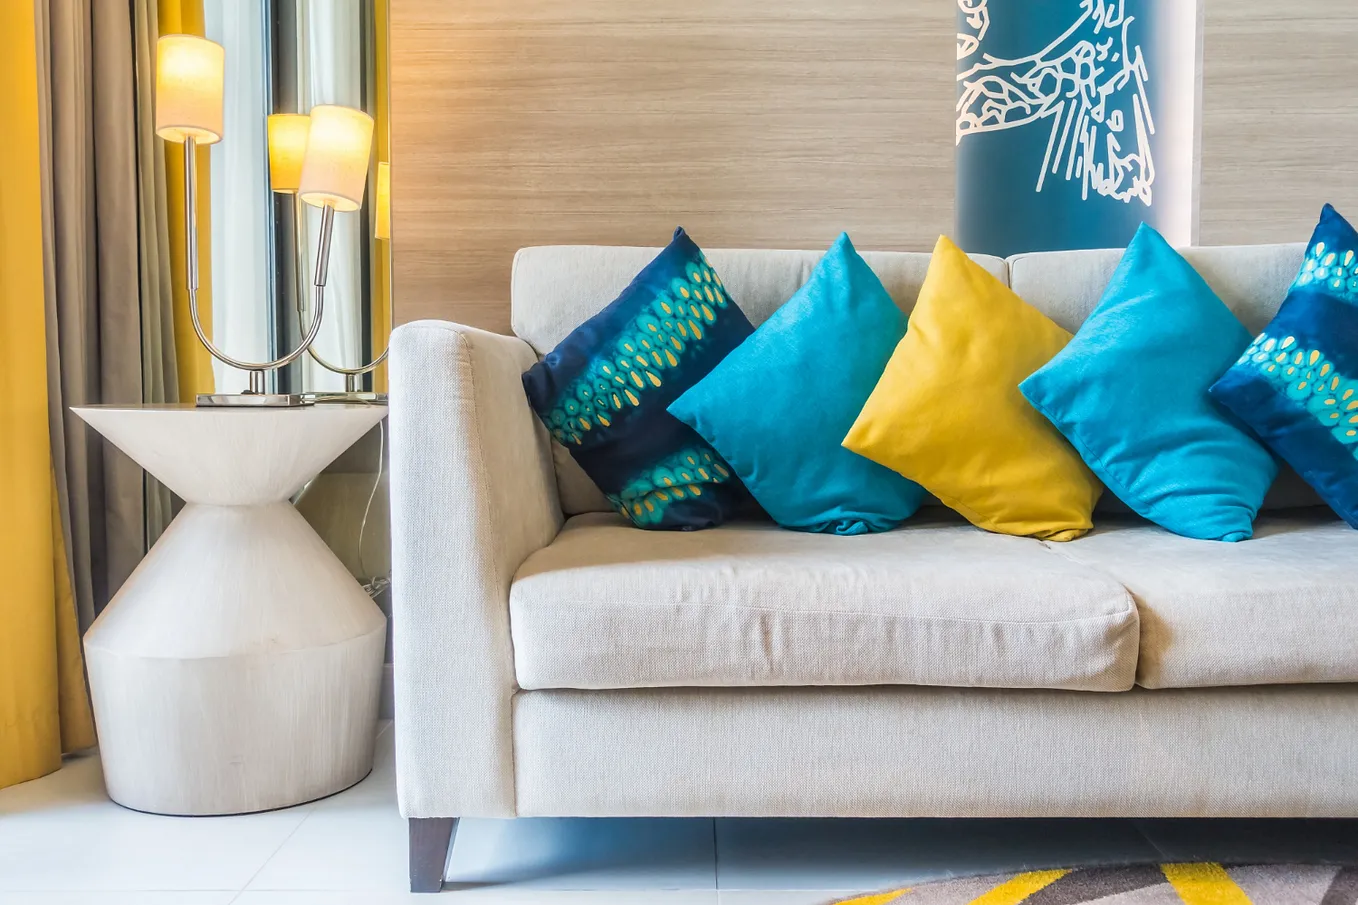 Style your interiors with Throw pillows